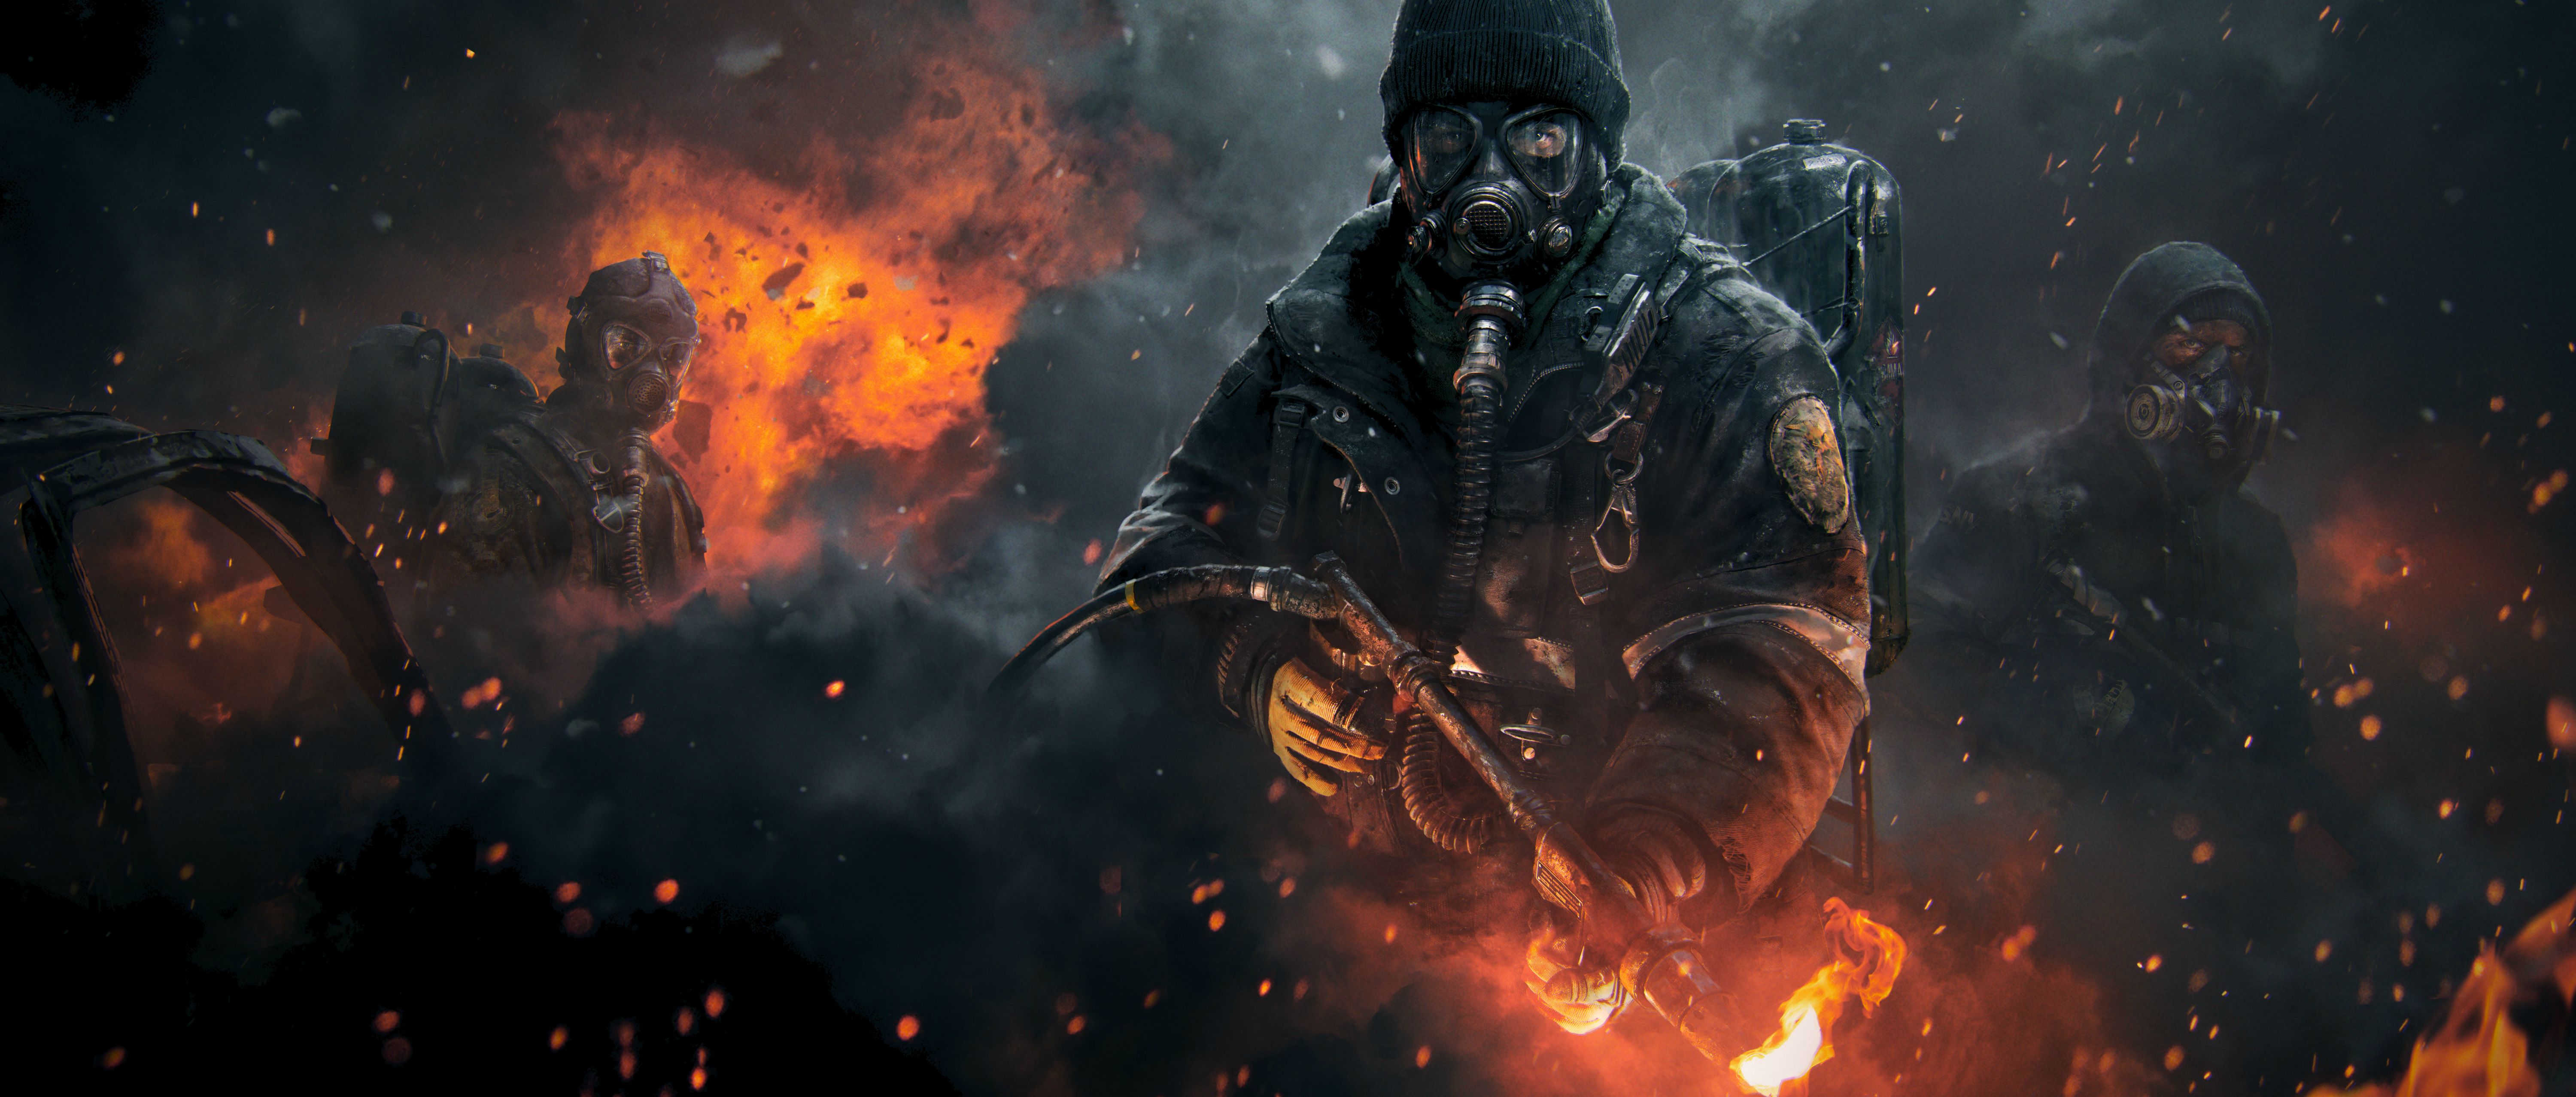 Tom Clancy's The Division HD Wallpaper